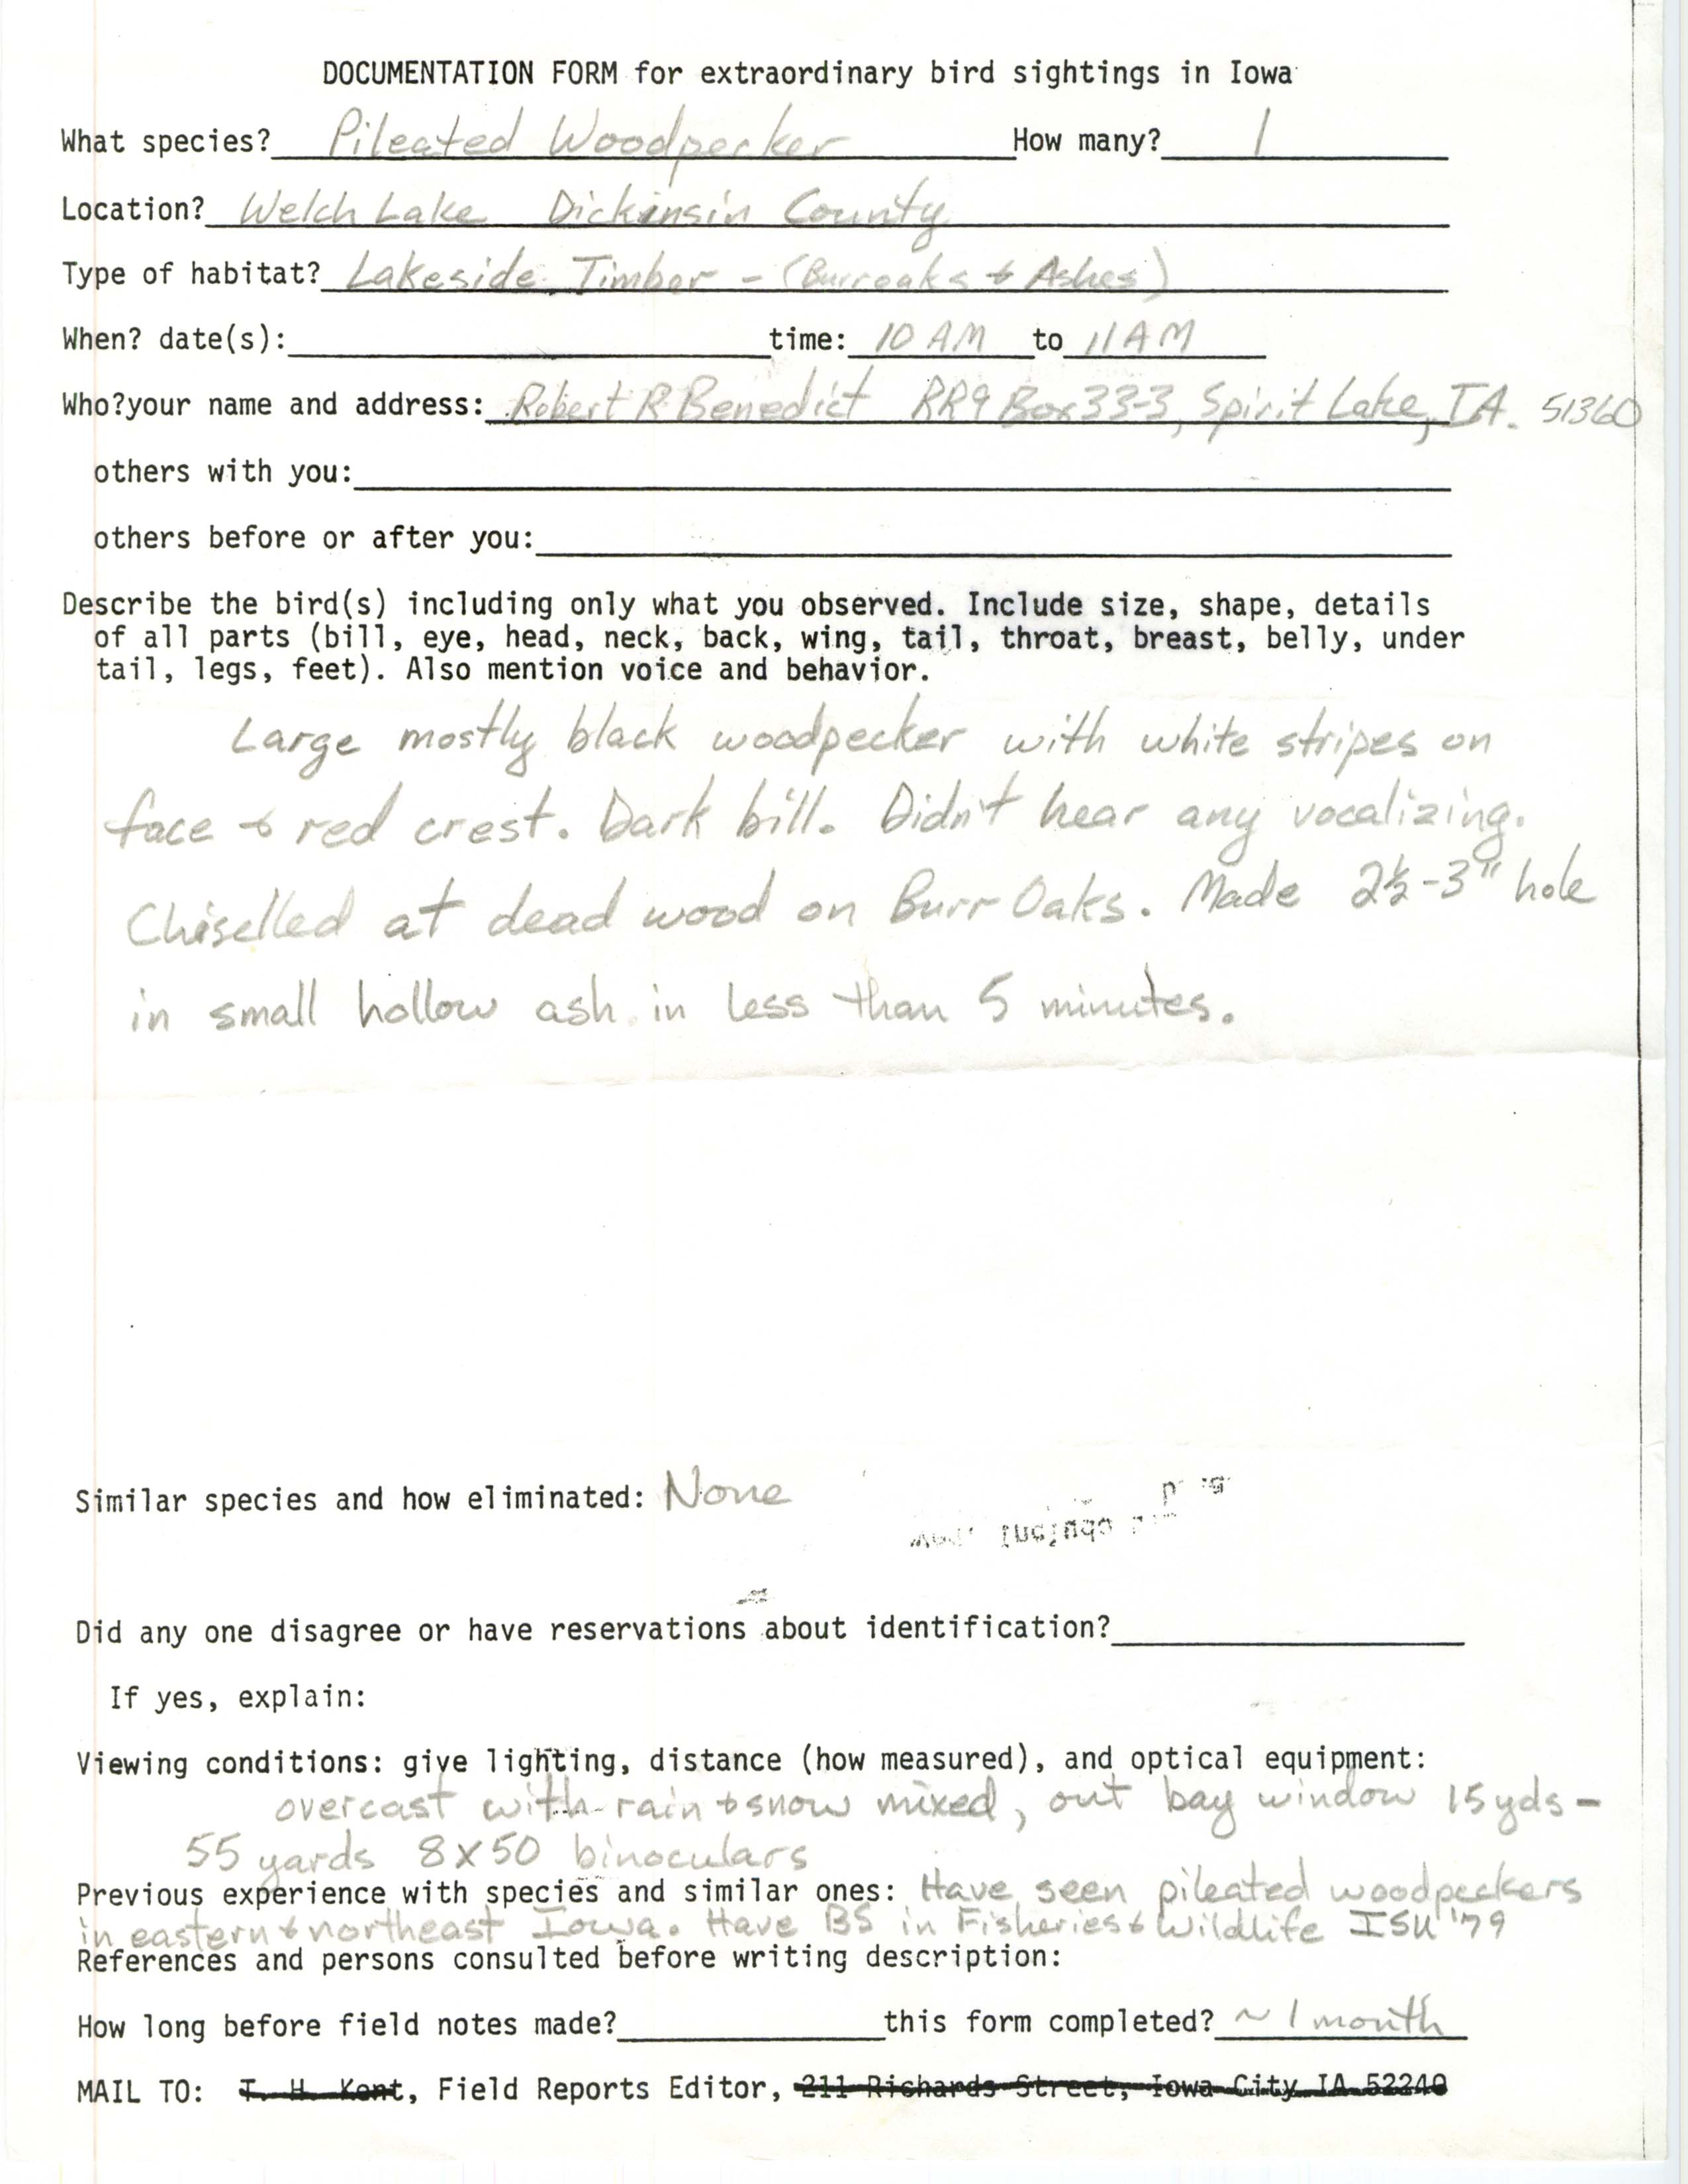 Rare bird documentation form for Pileated Woodpecker at Welch Lake, unknown year